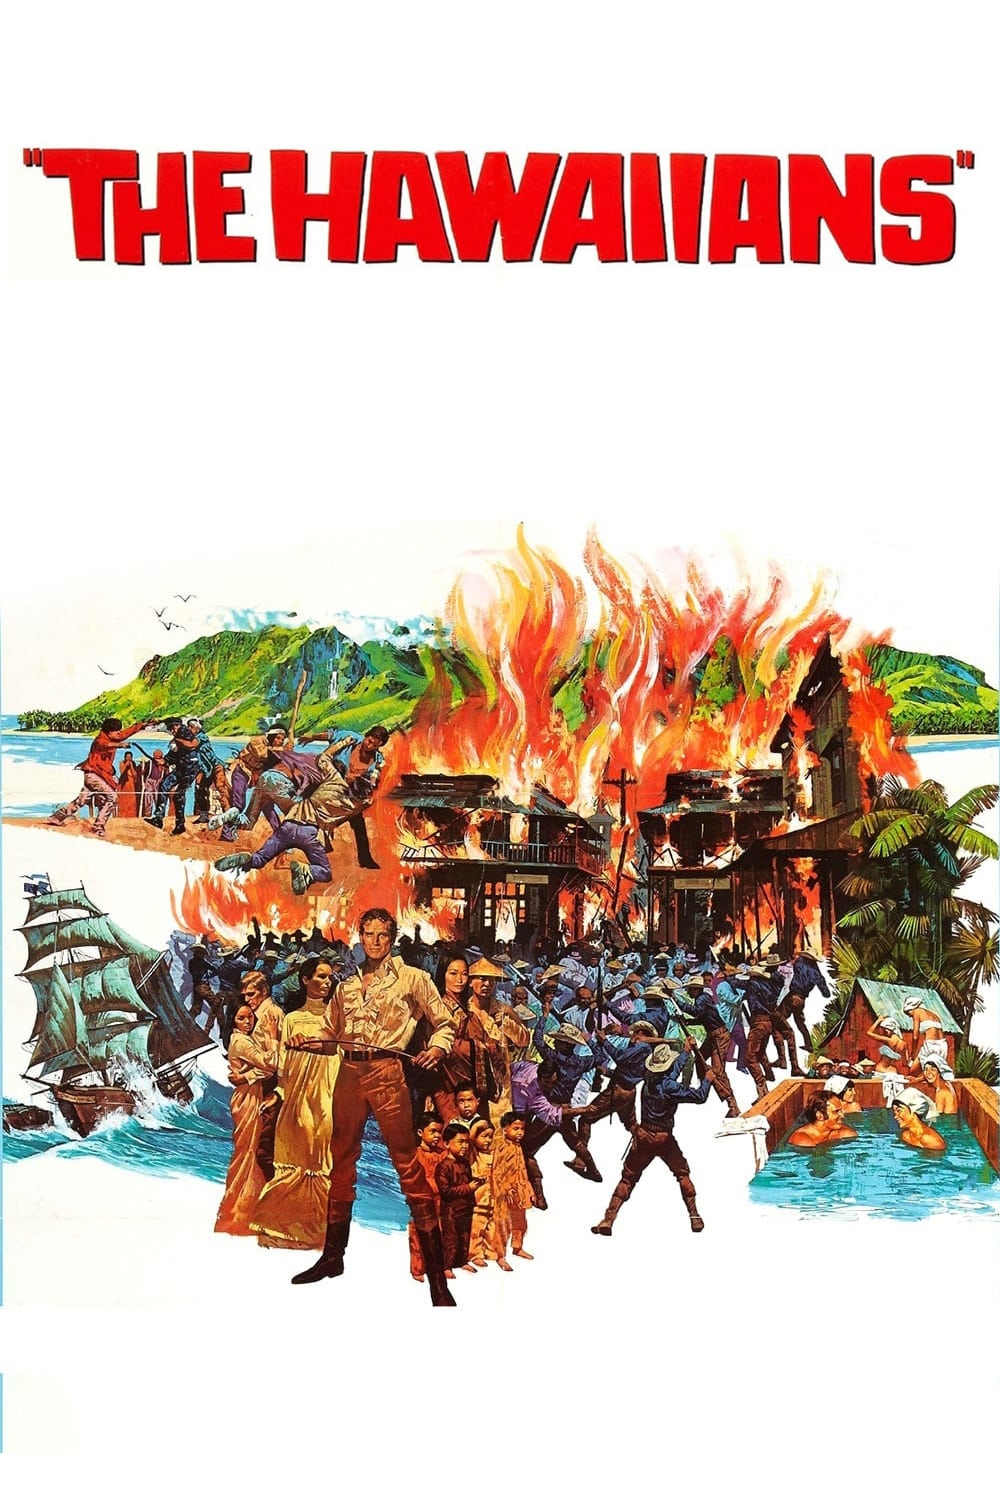 Los indomables (1970)